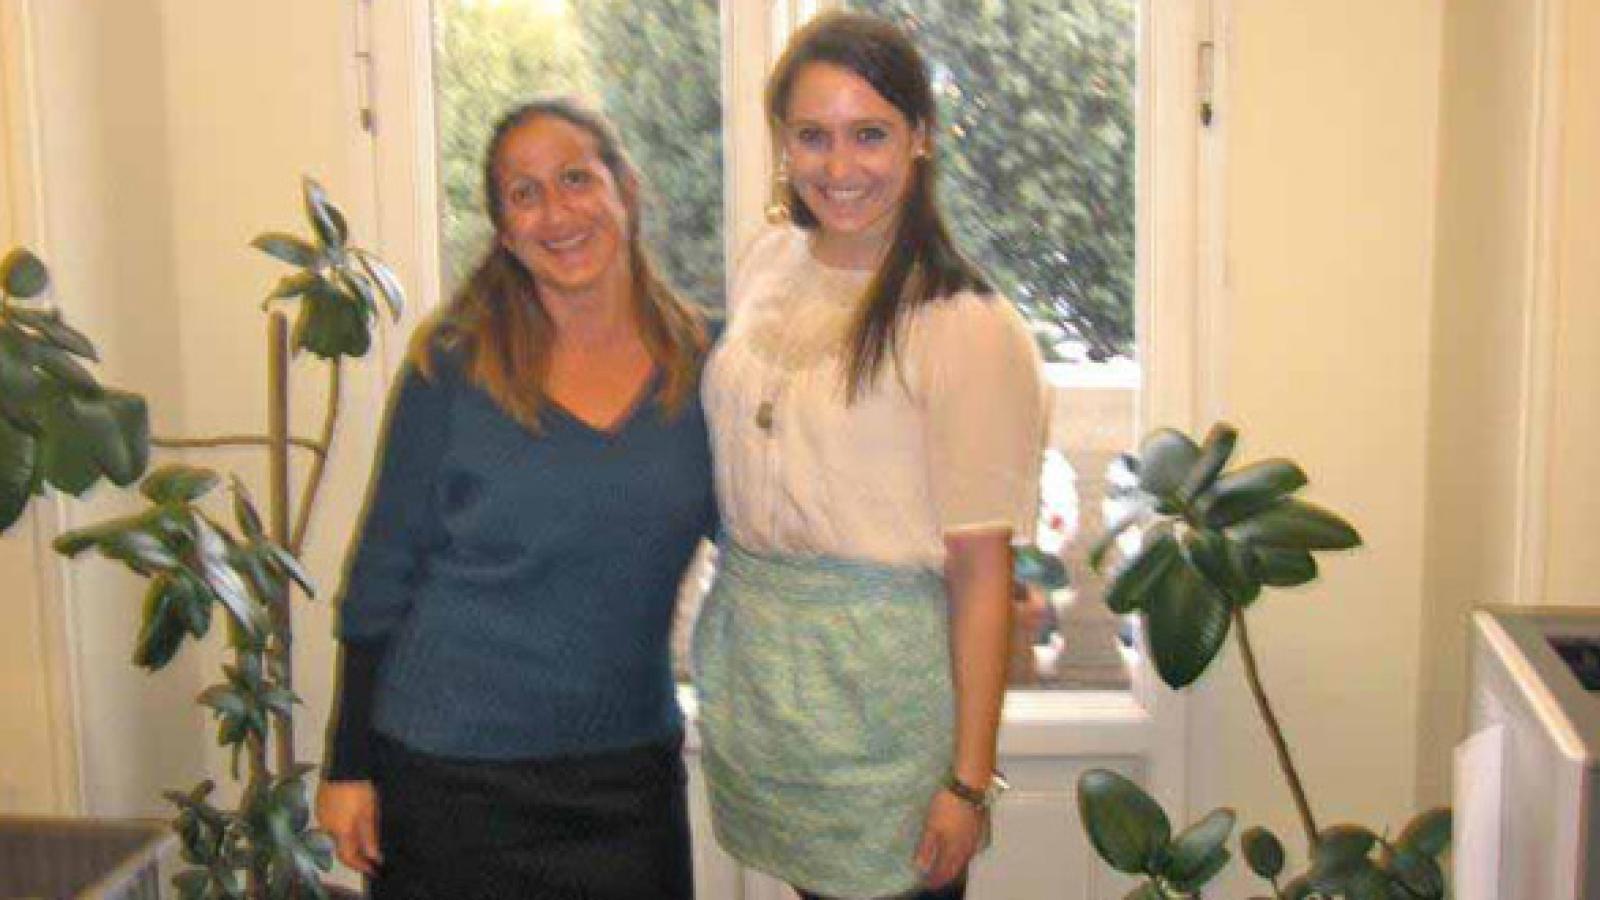 Kaitlin (right in photo) with a co‐worker during her State Department Internship in Rome.